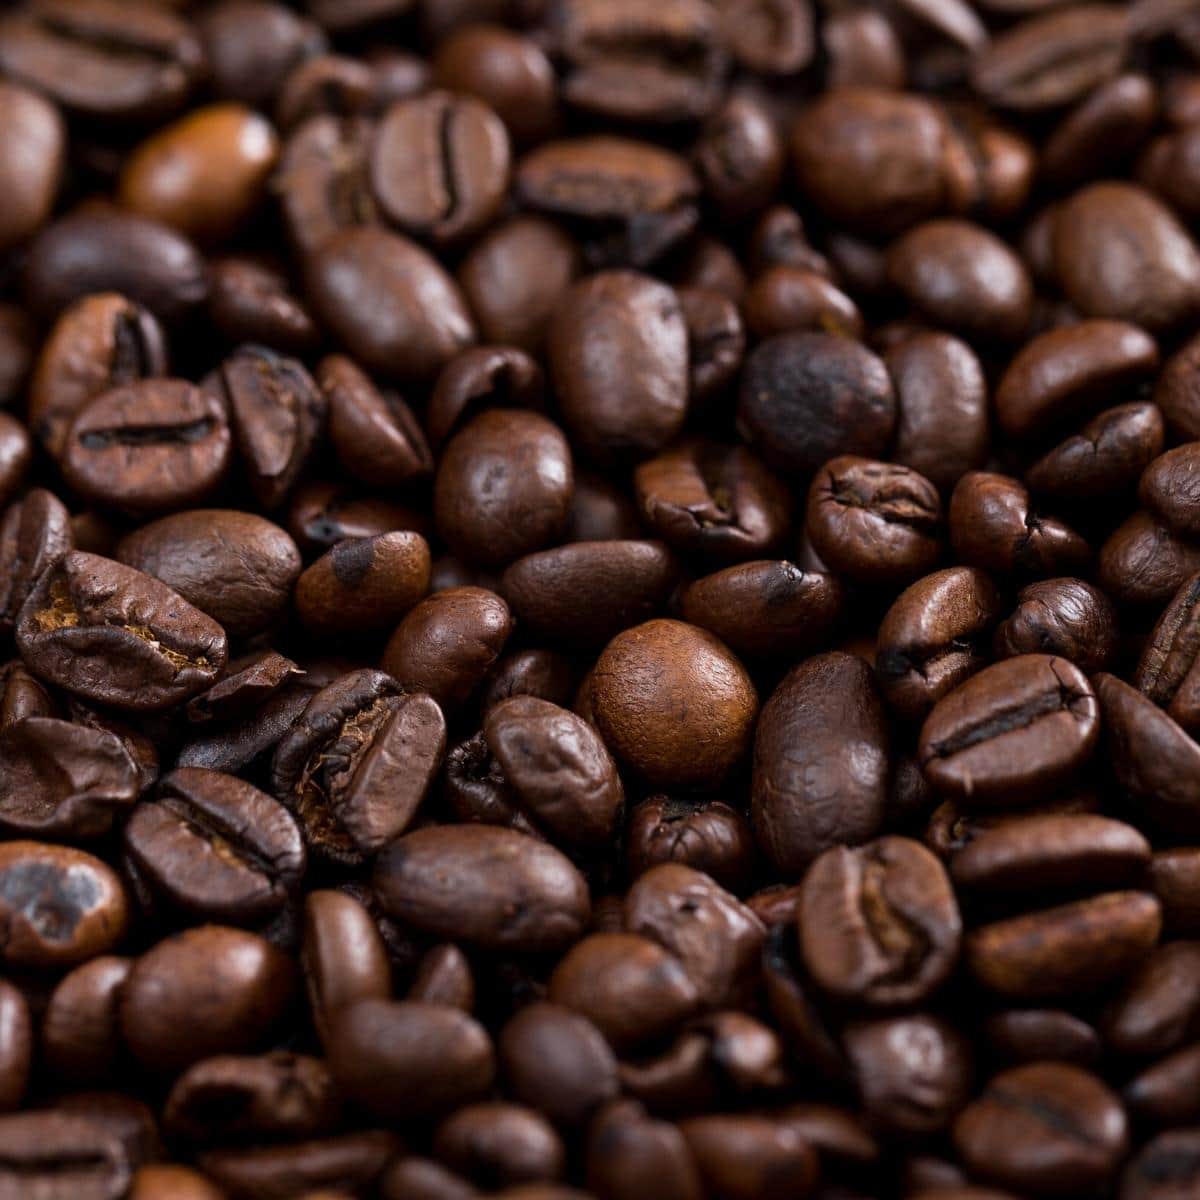 Close up shot of whole coffee beans.